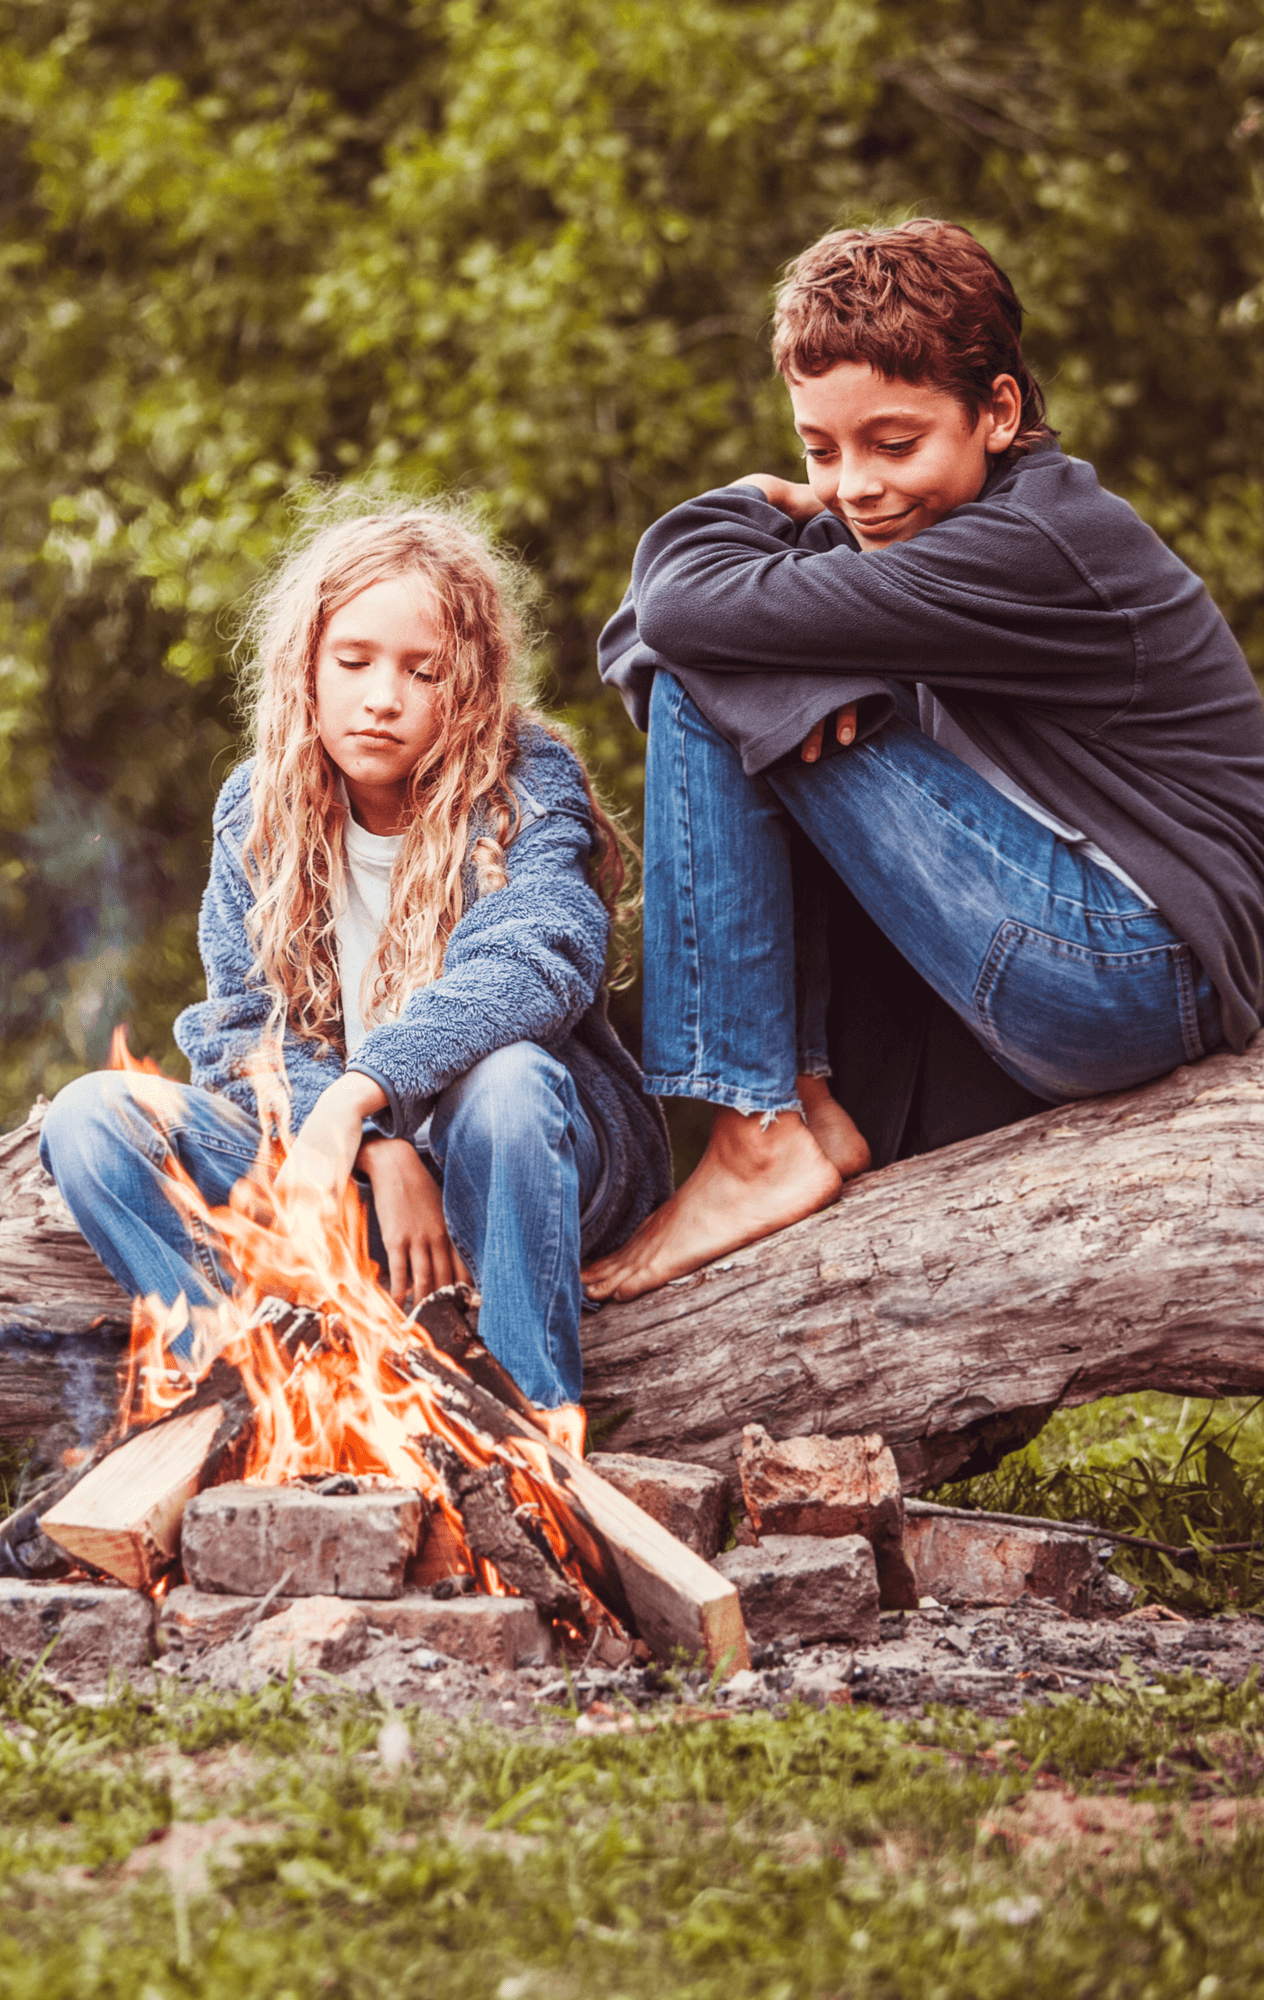 Two children sitting by a campfire.